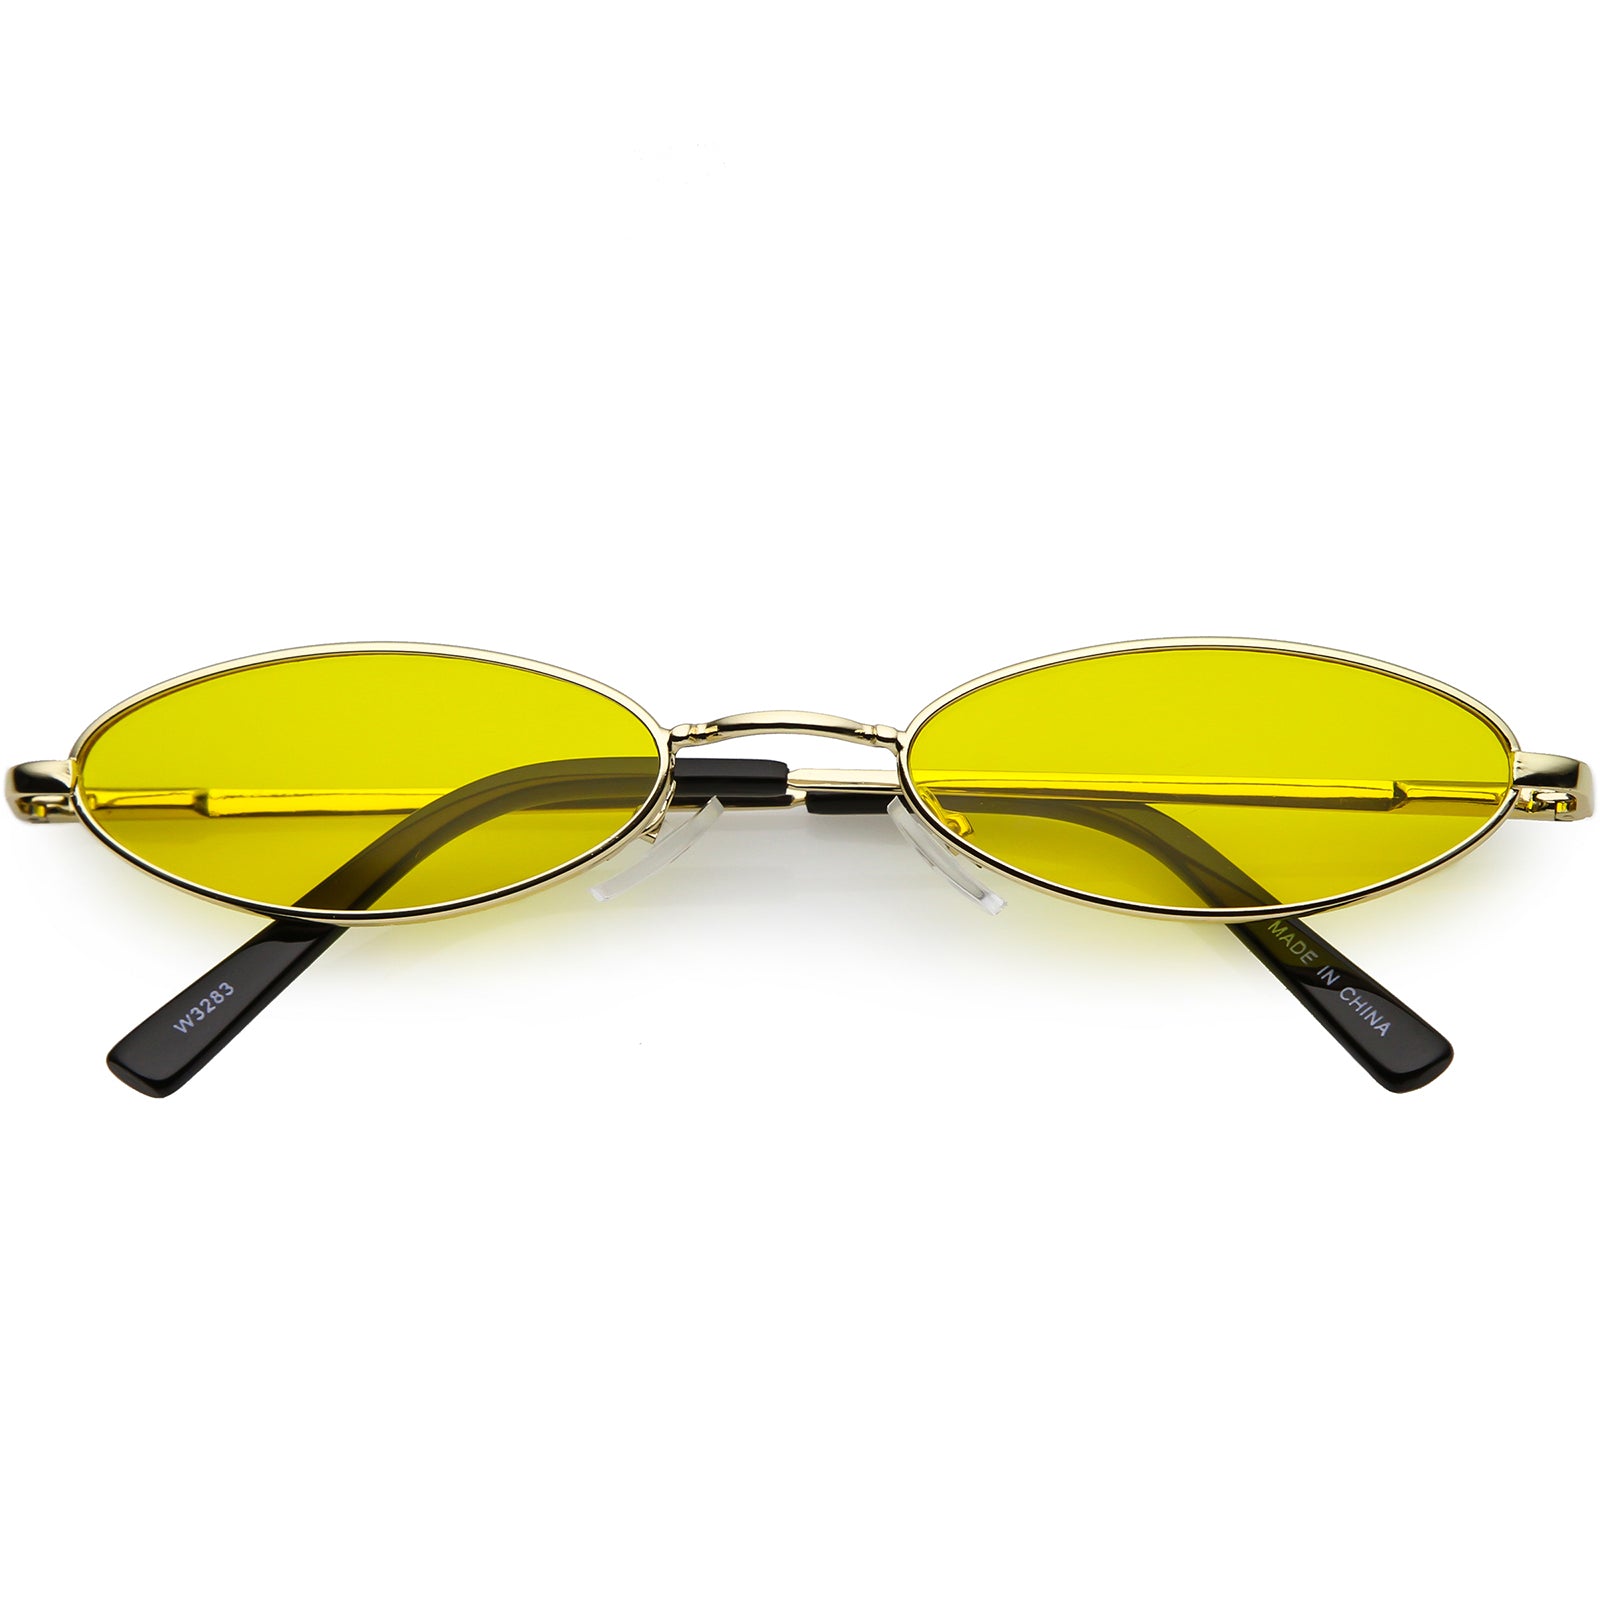 Retro Small Oval Sunglasses Slim Arms Color Tinted Flat Lens 51mm